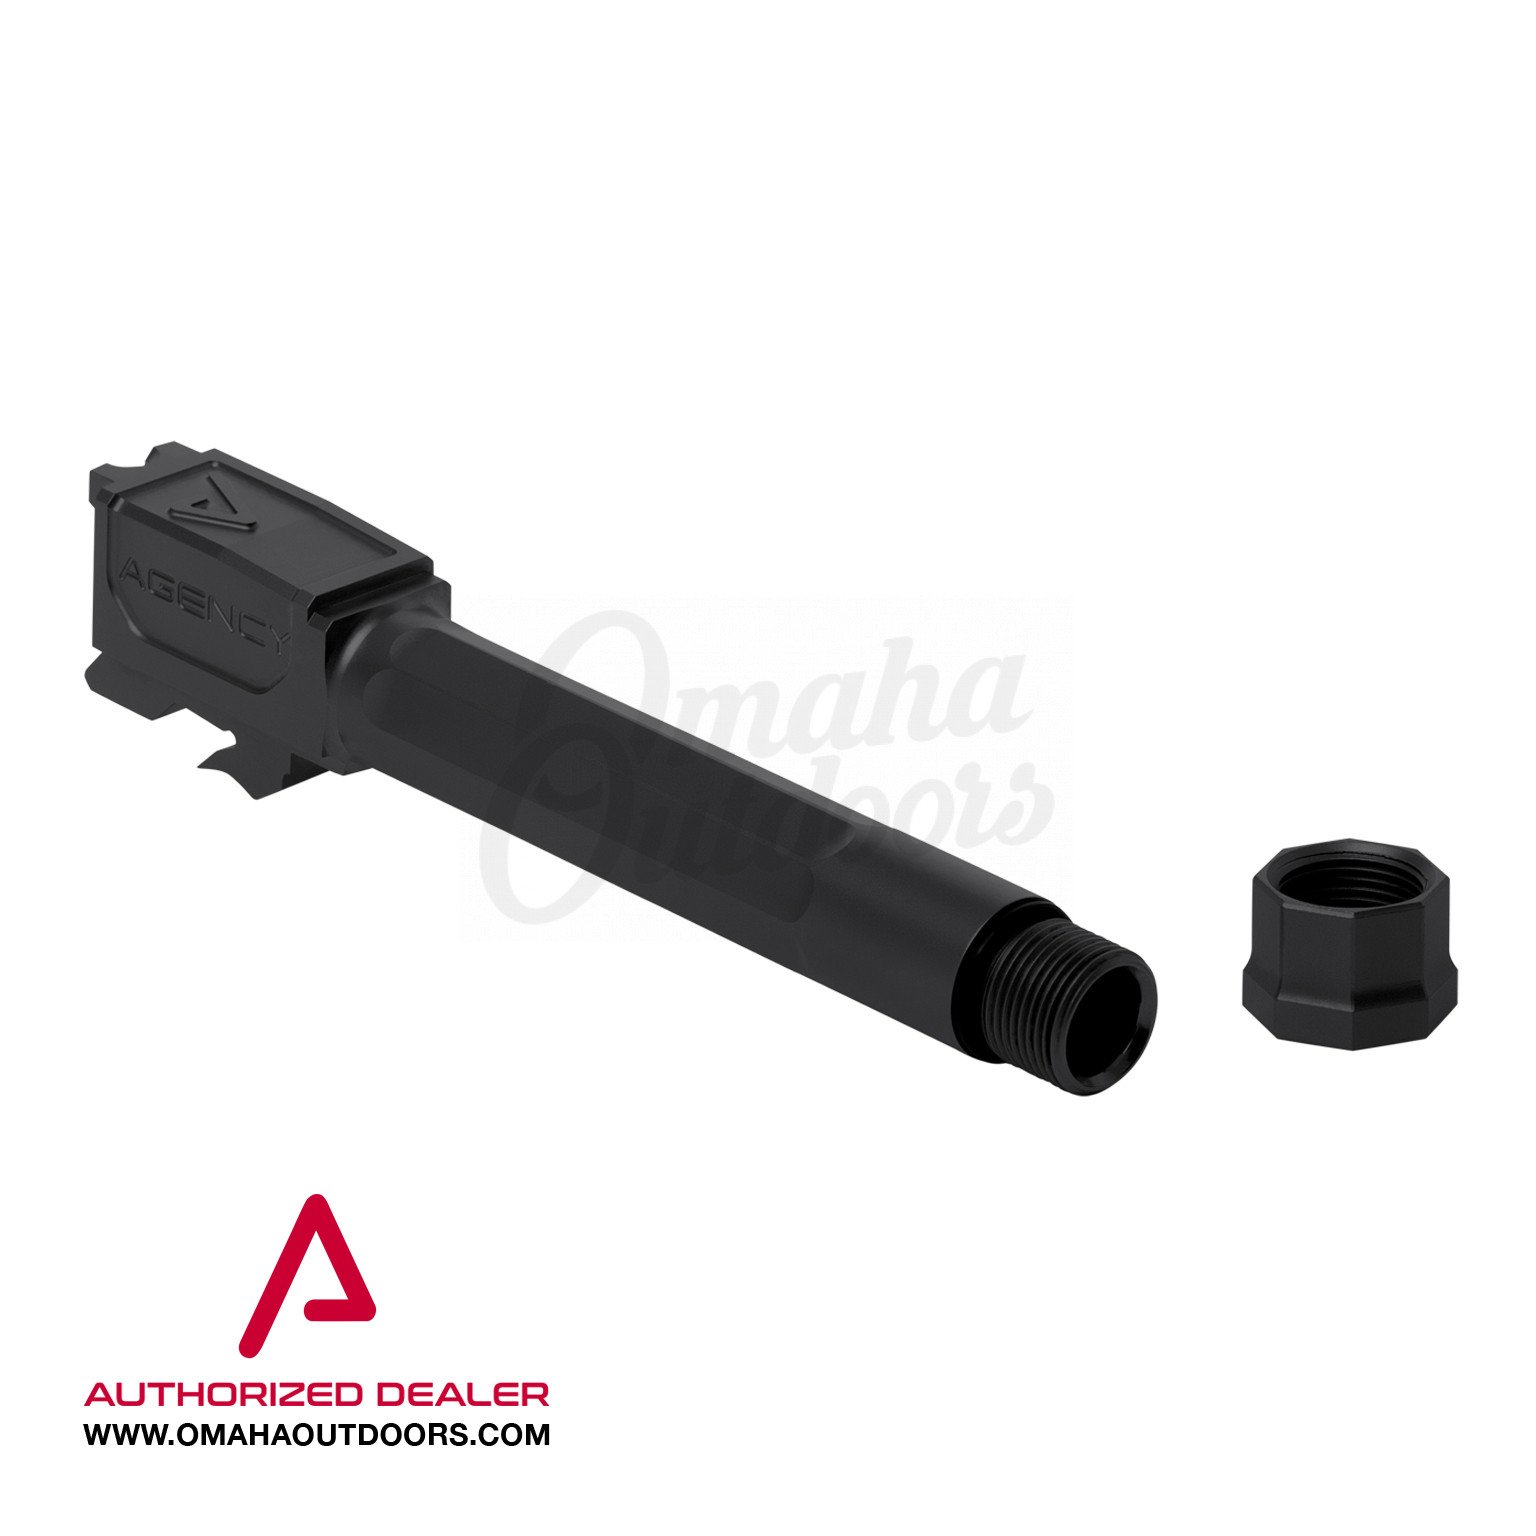 Agency Arms Premier Line Barrel M P 2 0 Compact Thr 4 9mm Octagonal Fluted Plm24t F Omaha Outdoors